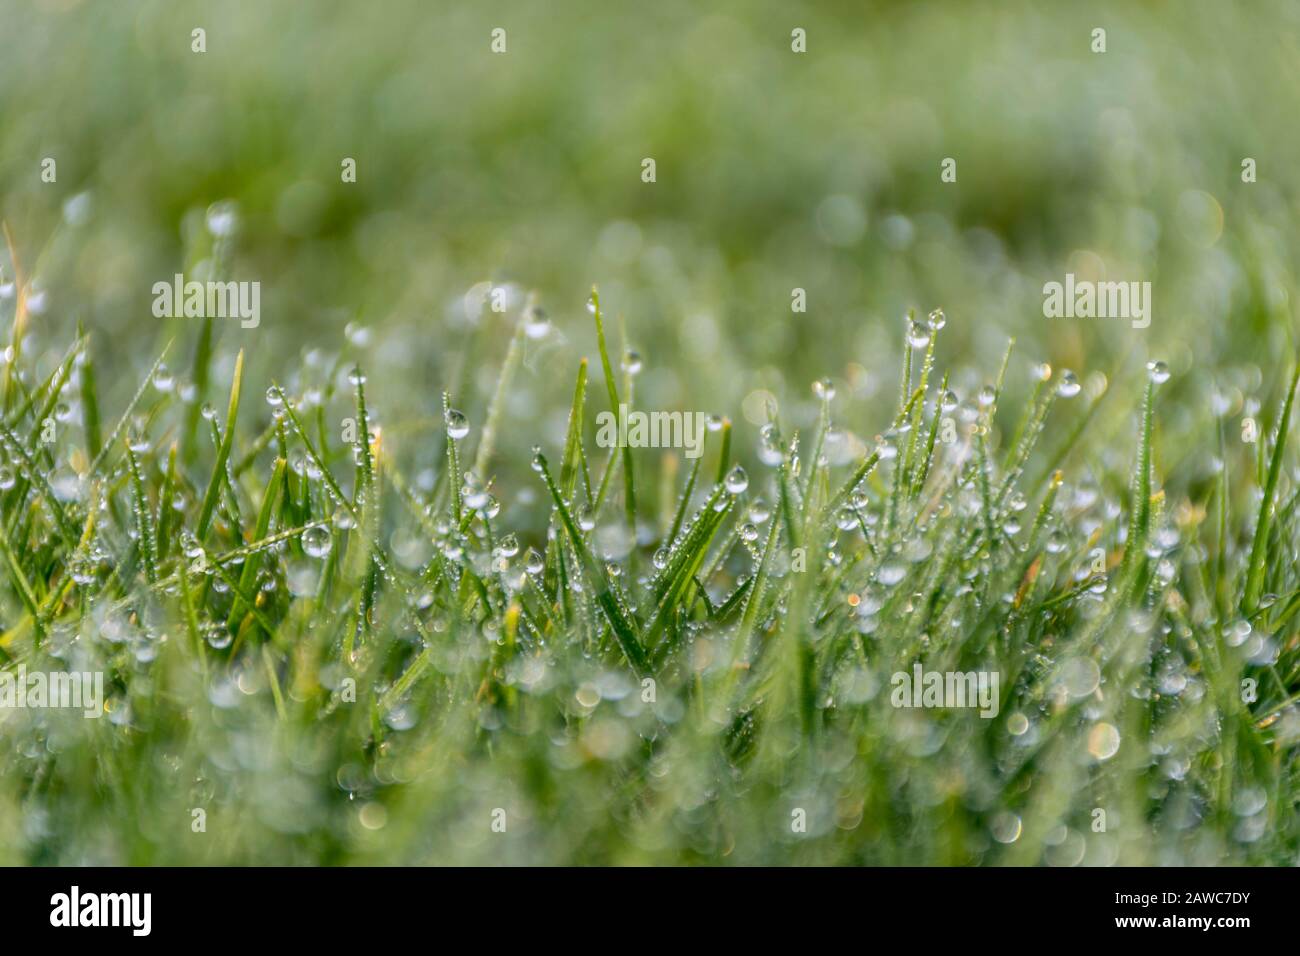 Spring green grass with raindrops Stock Photo